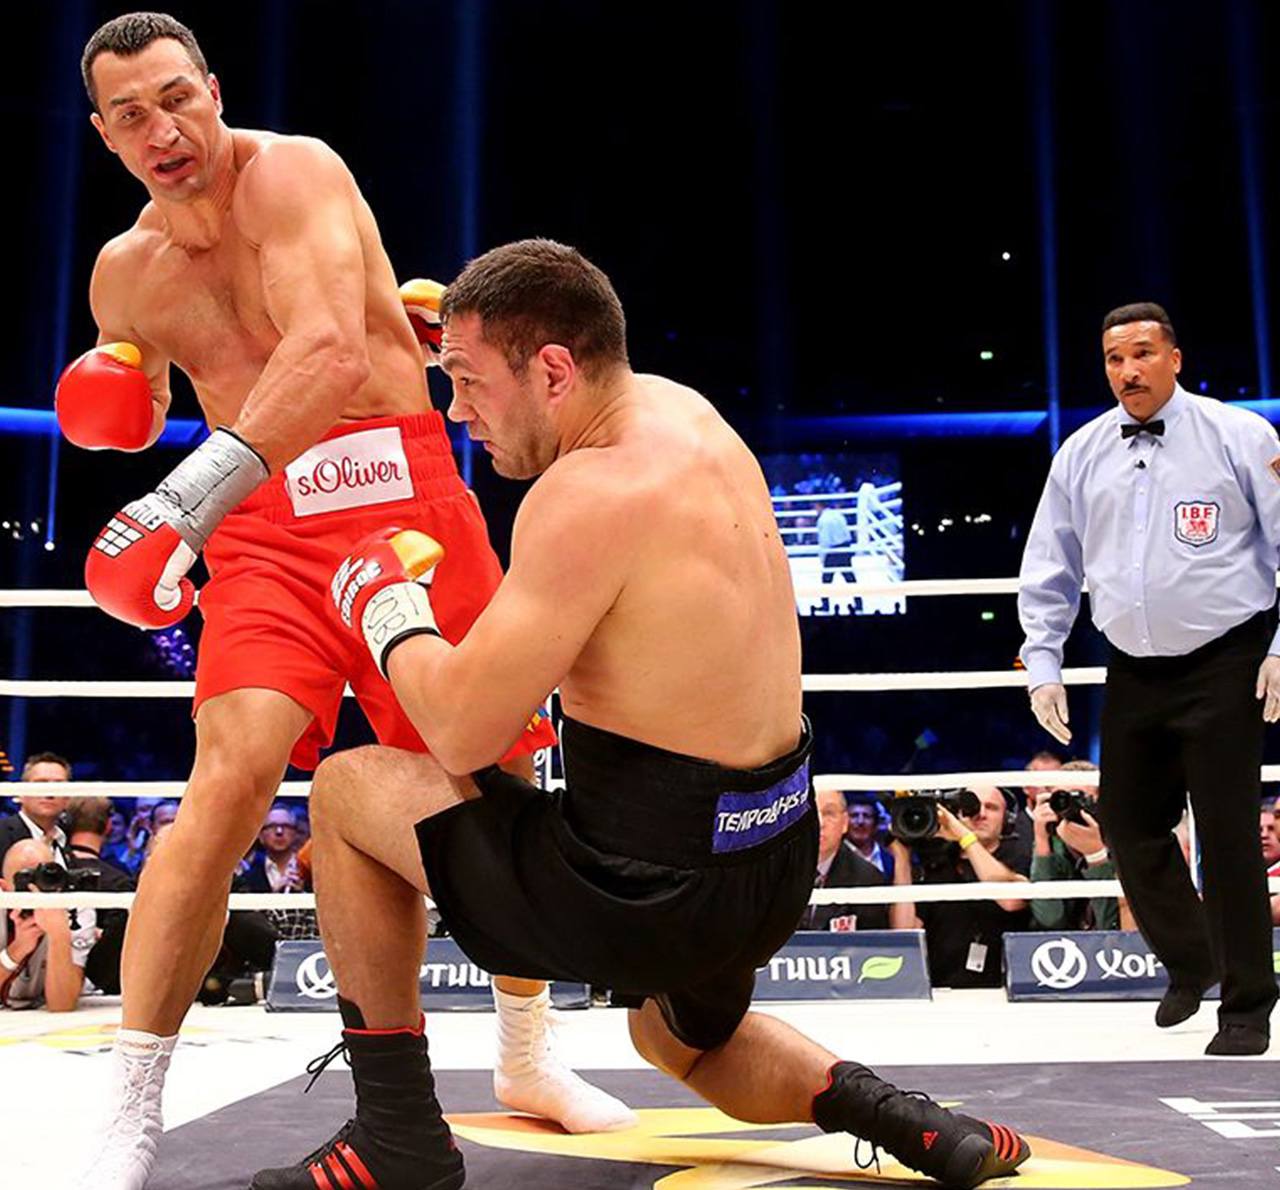 It’s the Right Time to AppreciateWladimir Klitschko’s All-Time GreatCareer